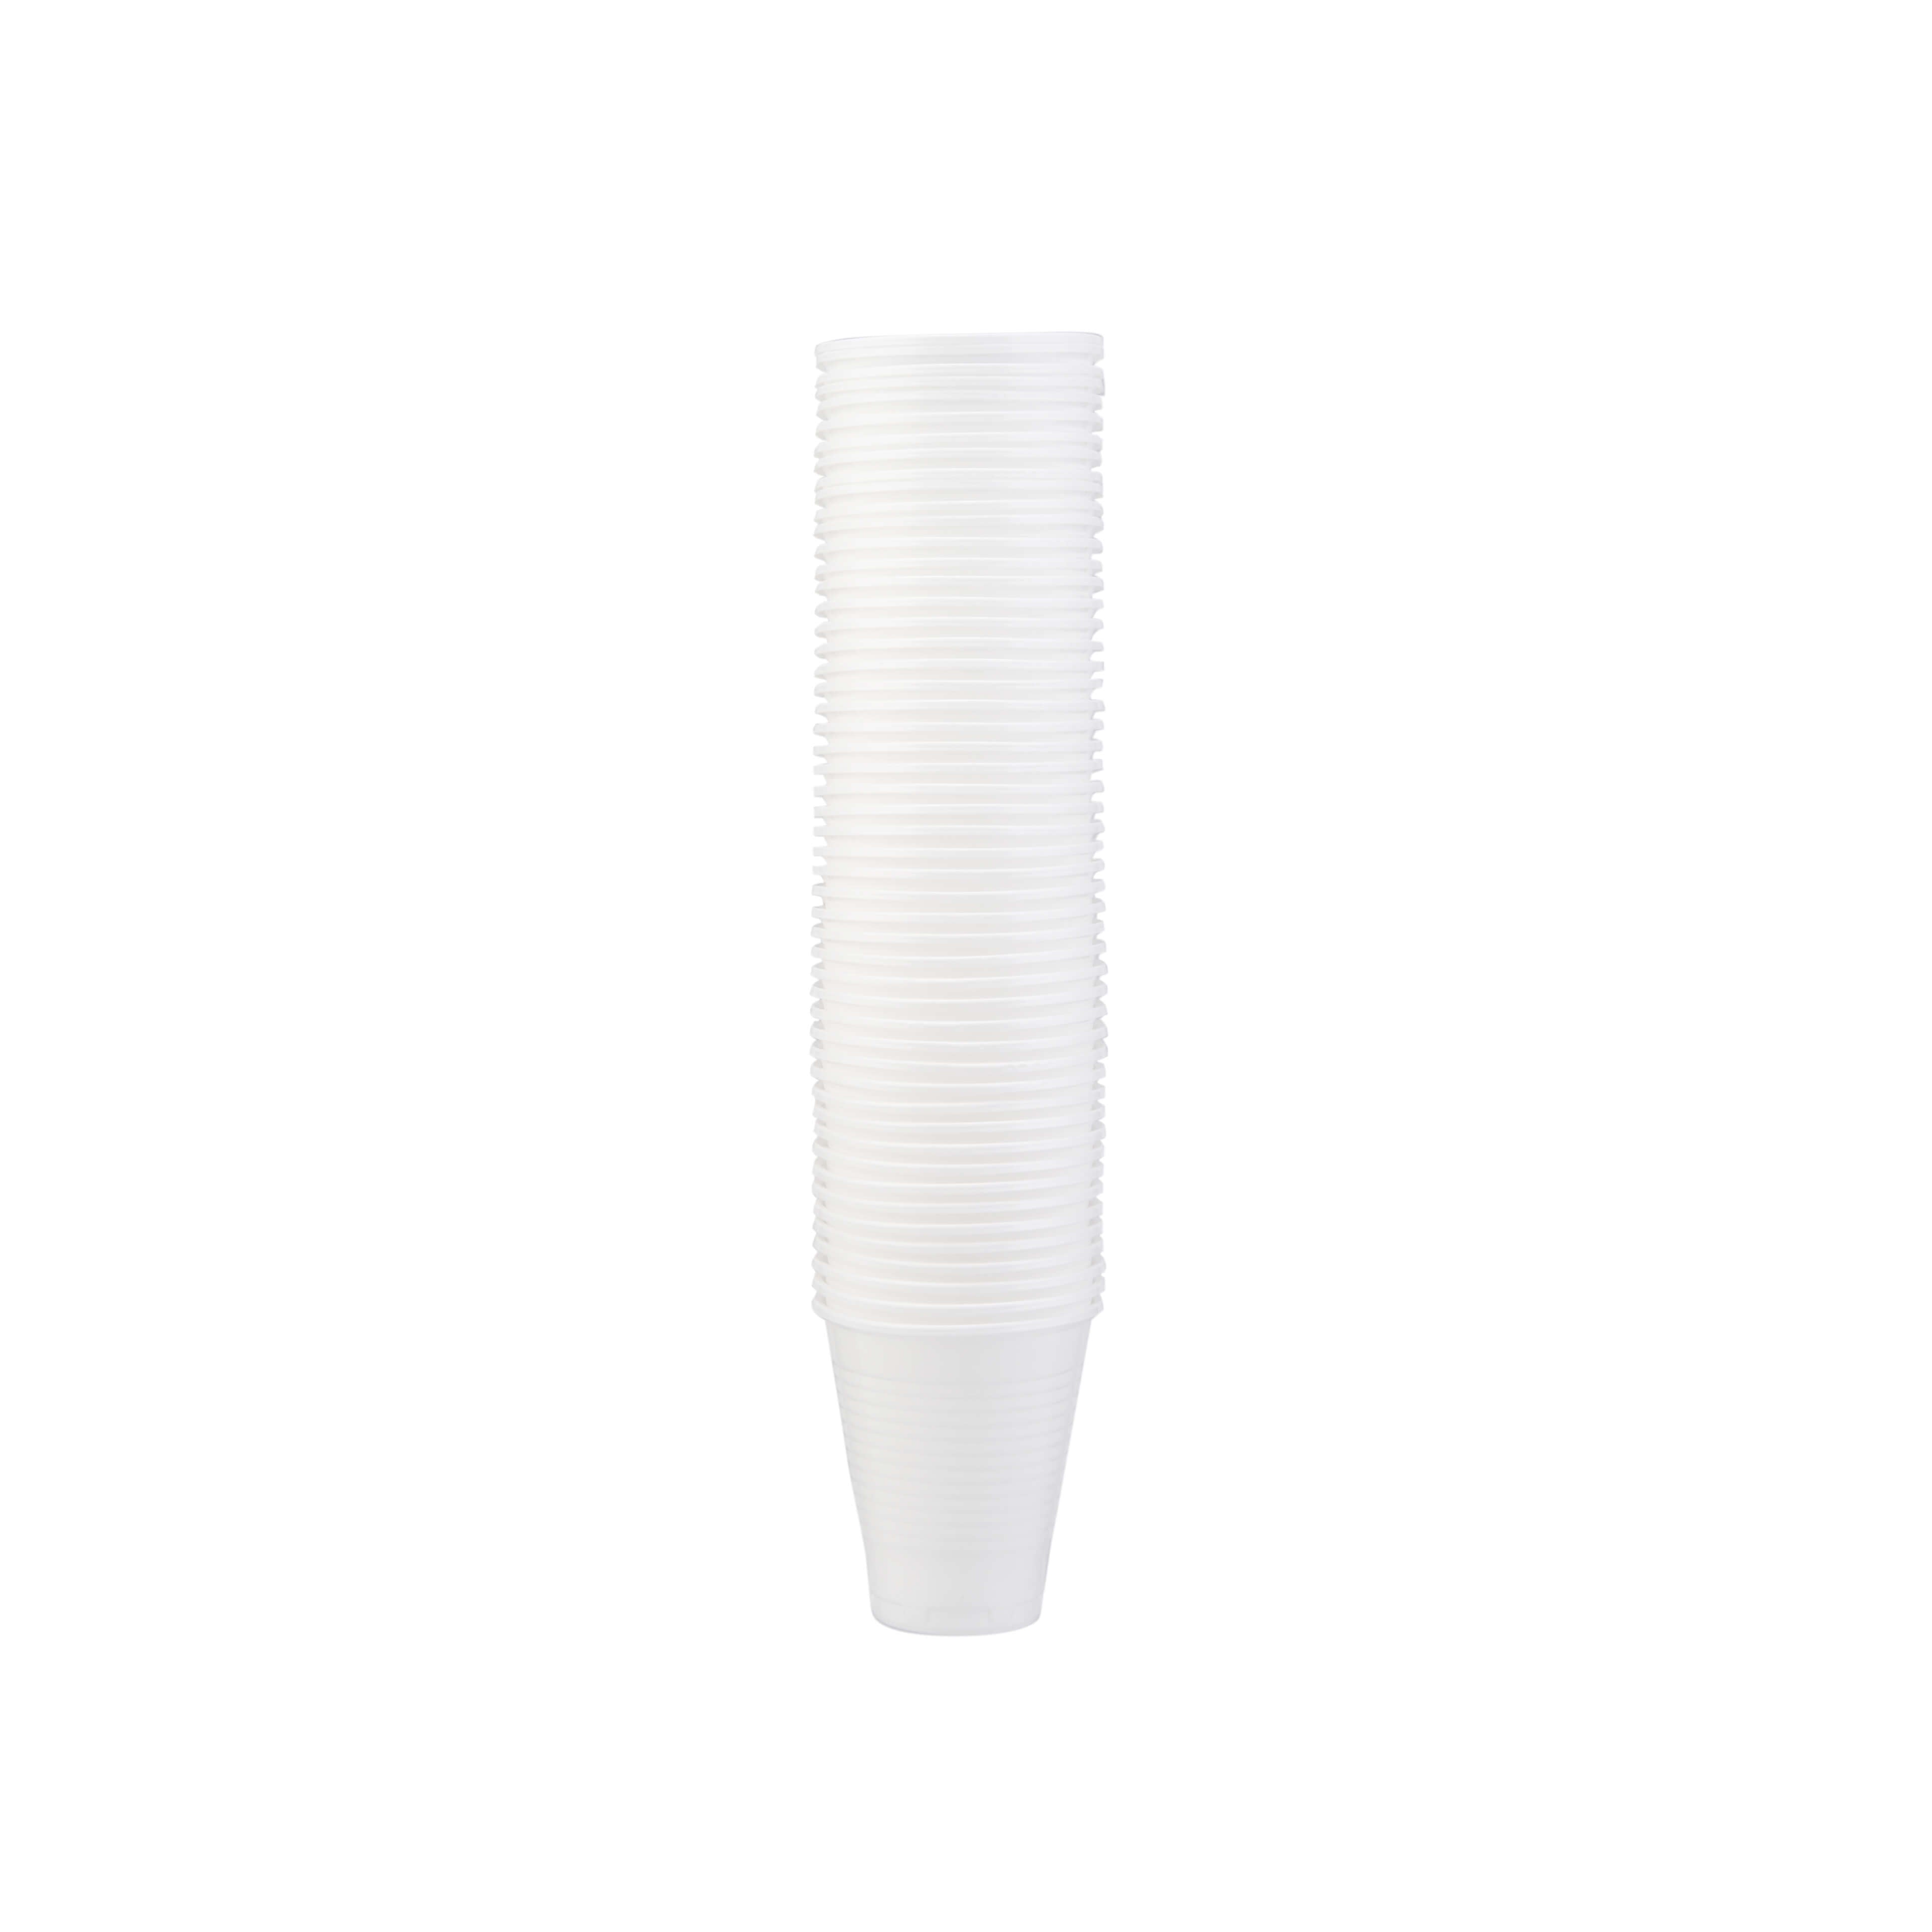 5 Oz white PP plastic cup - Hotpack Global 